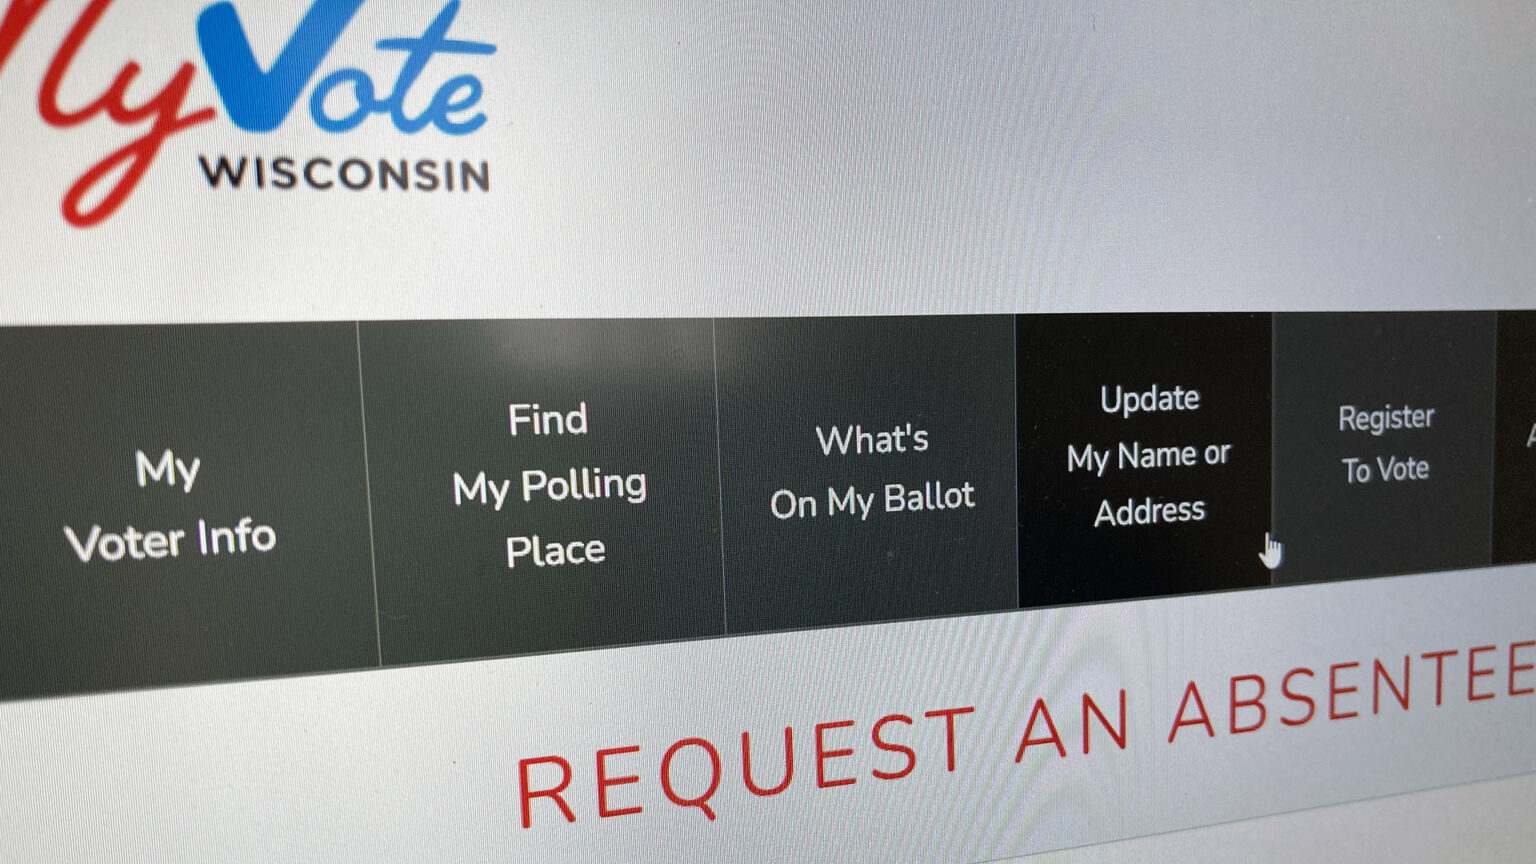 A photo shows a computer screen displaying a page on myvote.wi.gov about requesting absentee ballots, with the cursor pointing at a link titled Update My Name or Address.